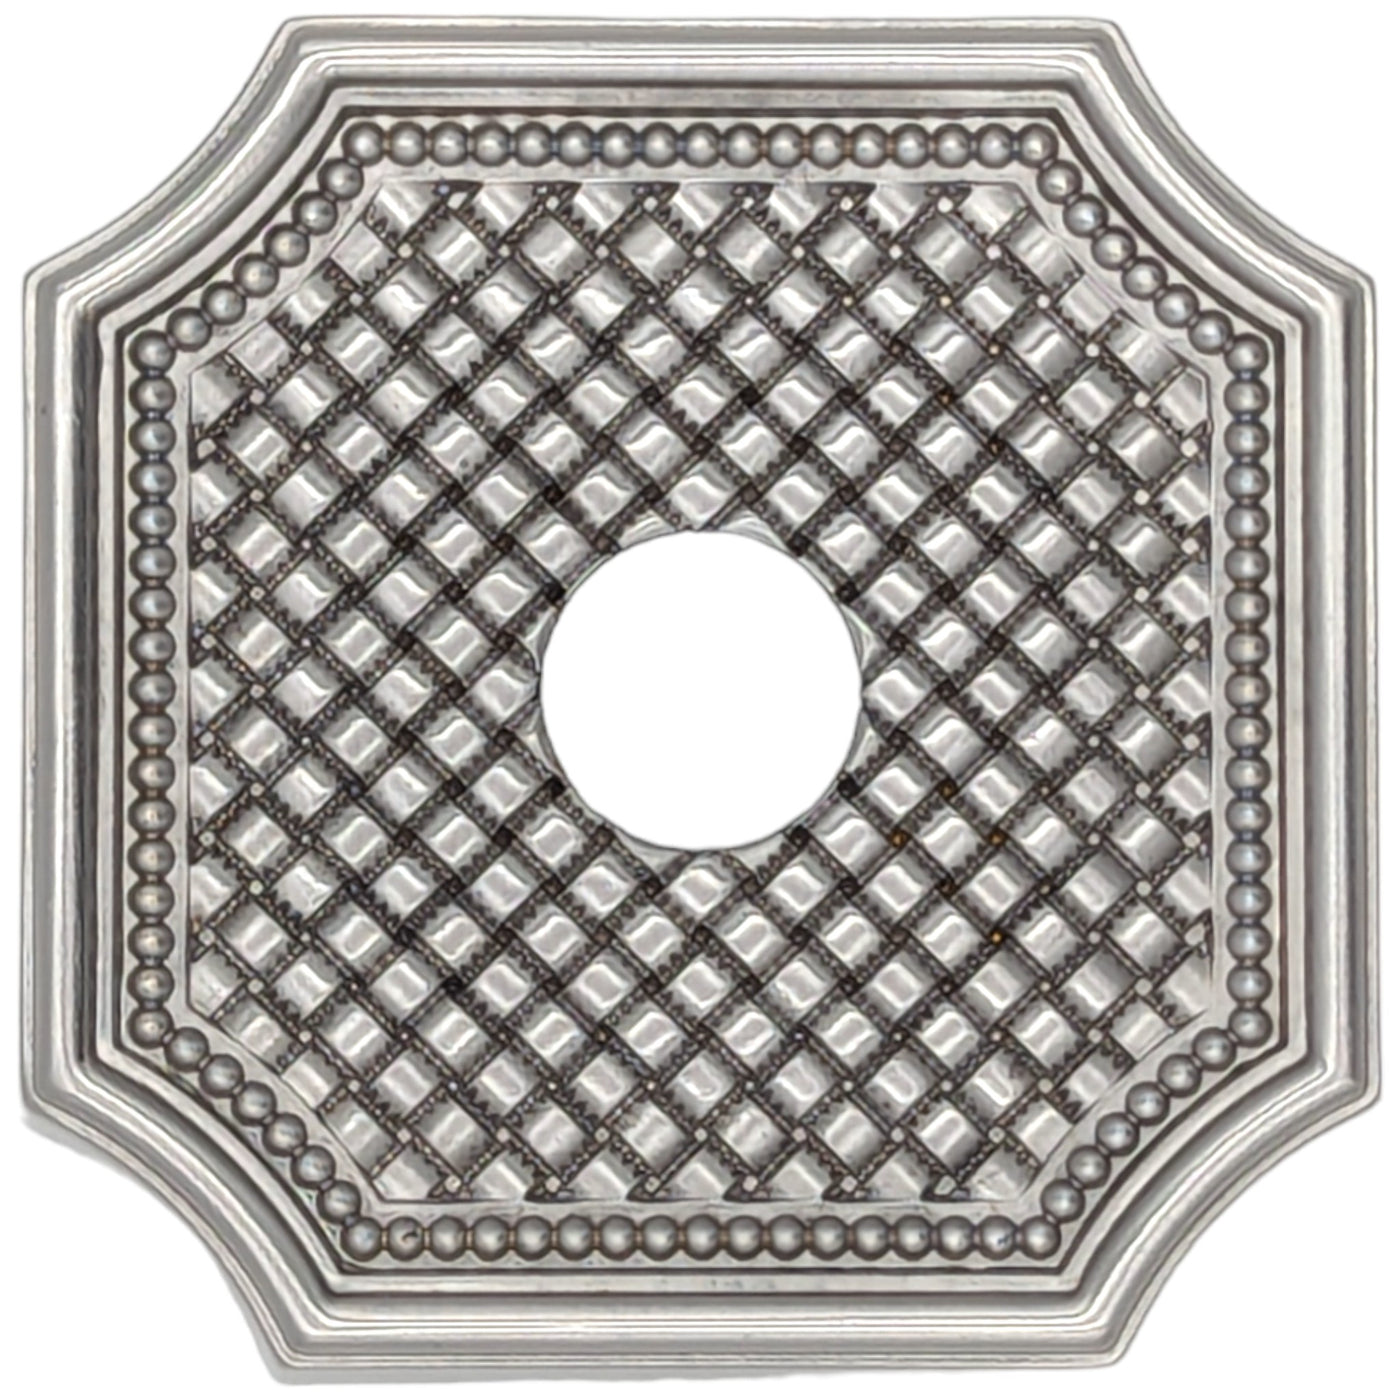 Basket Weave Solid Brass Rosette (Several Finishes Available)